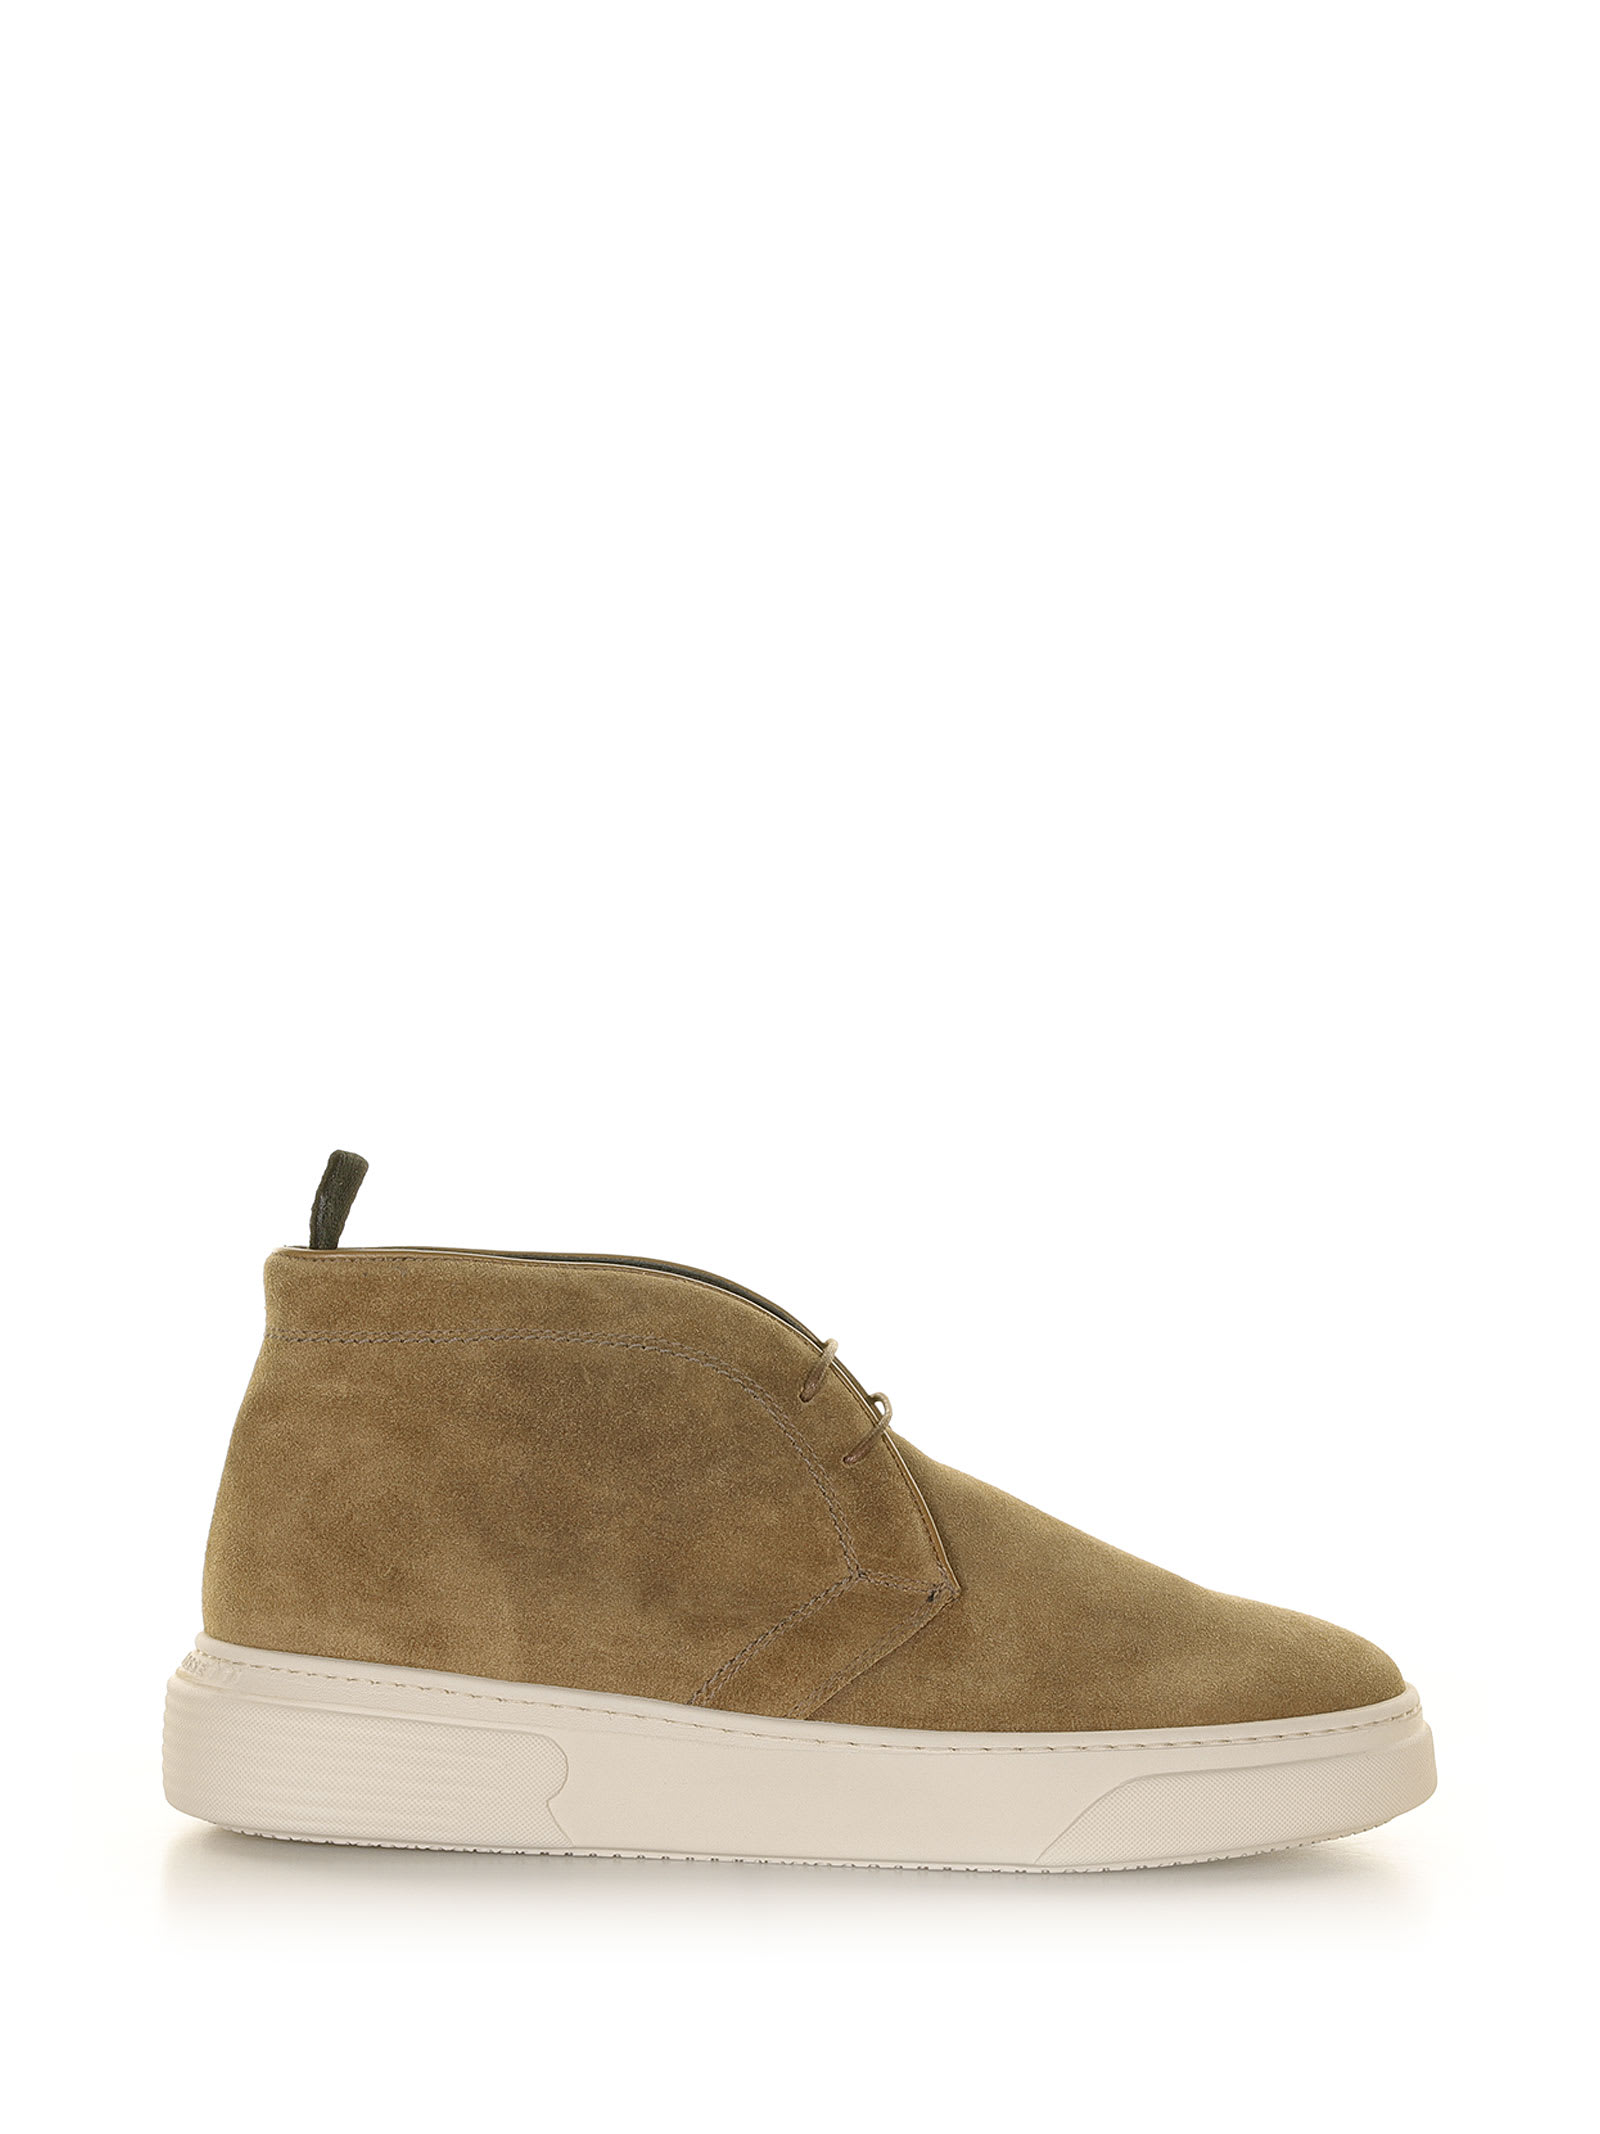 Fratelli Rossetti One Ankle Boot In Suede And Rubber Sole